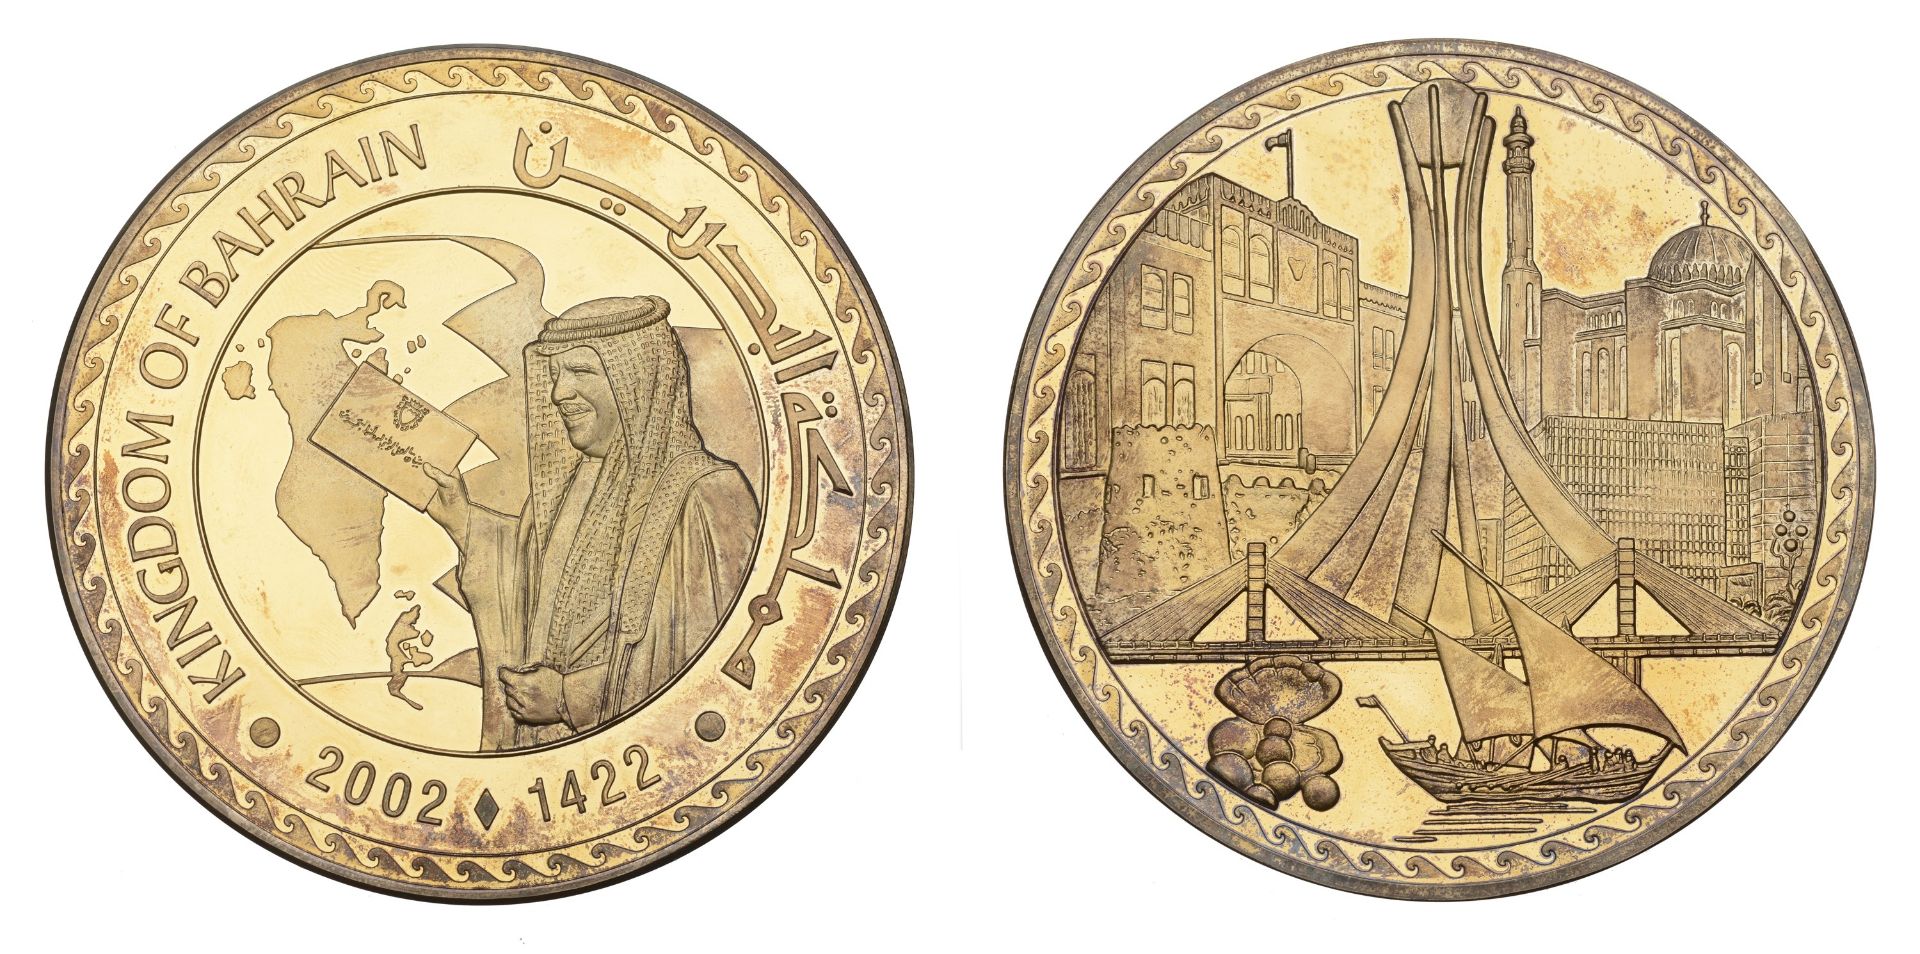 BAHRAIN, Announcement of the Kingdom of Bahrain, 2002, a gold-plated silver medal, unsigned,...